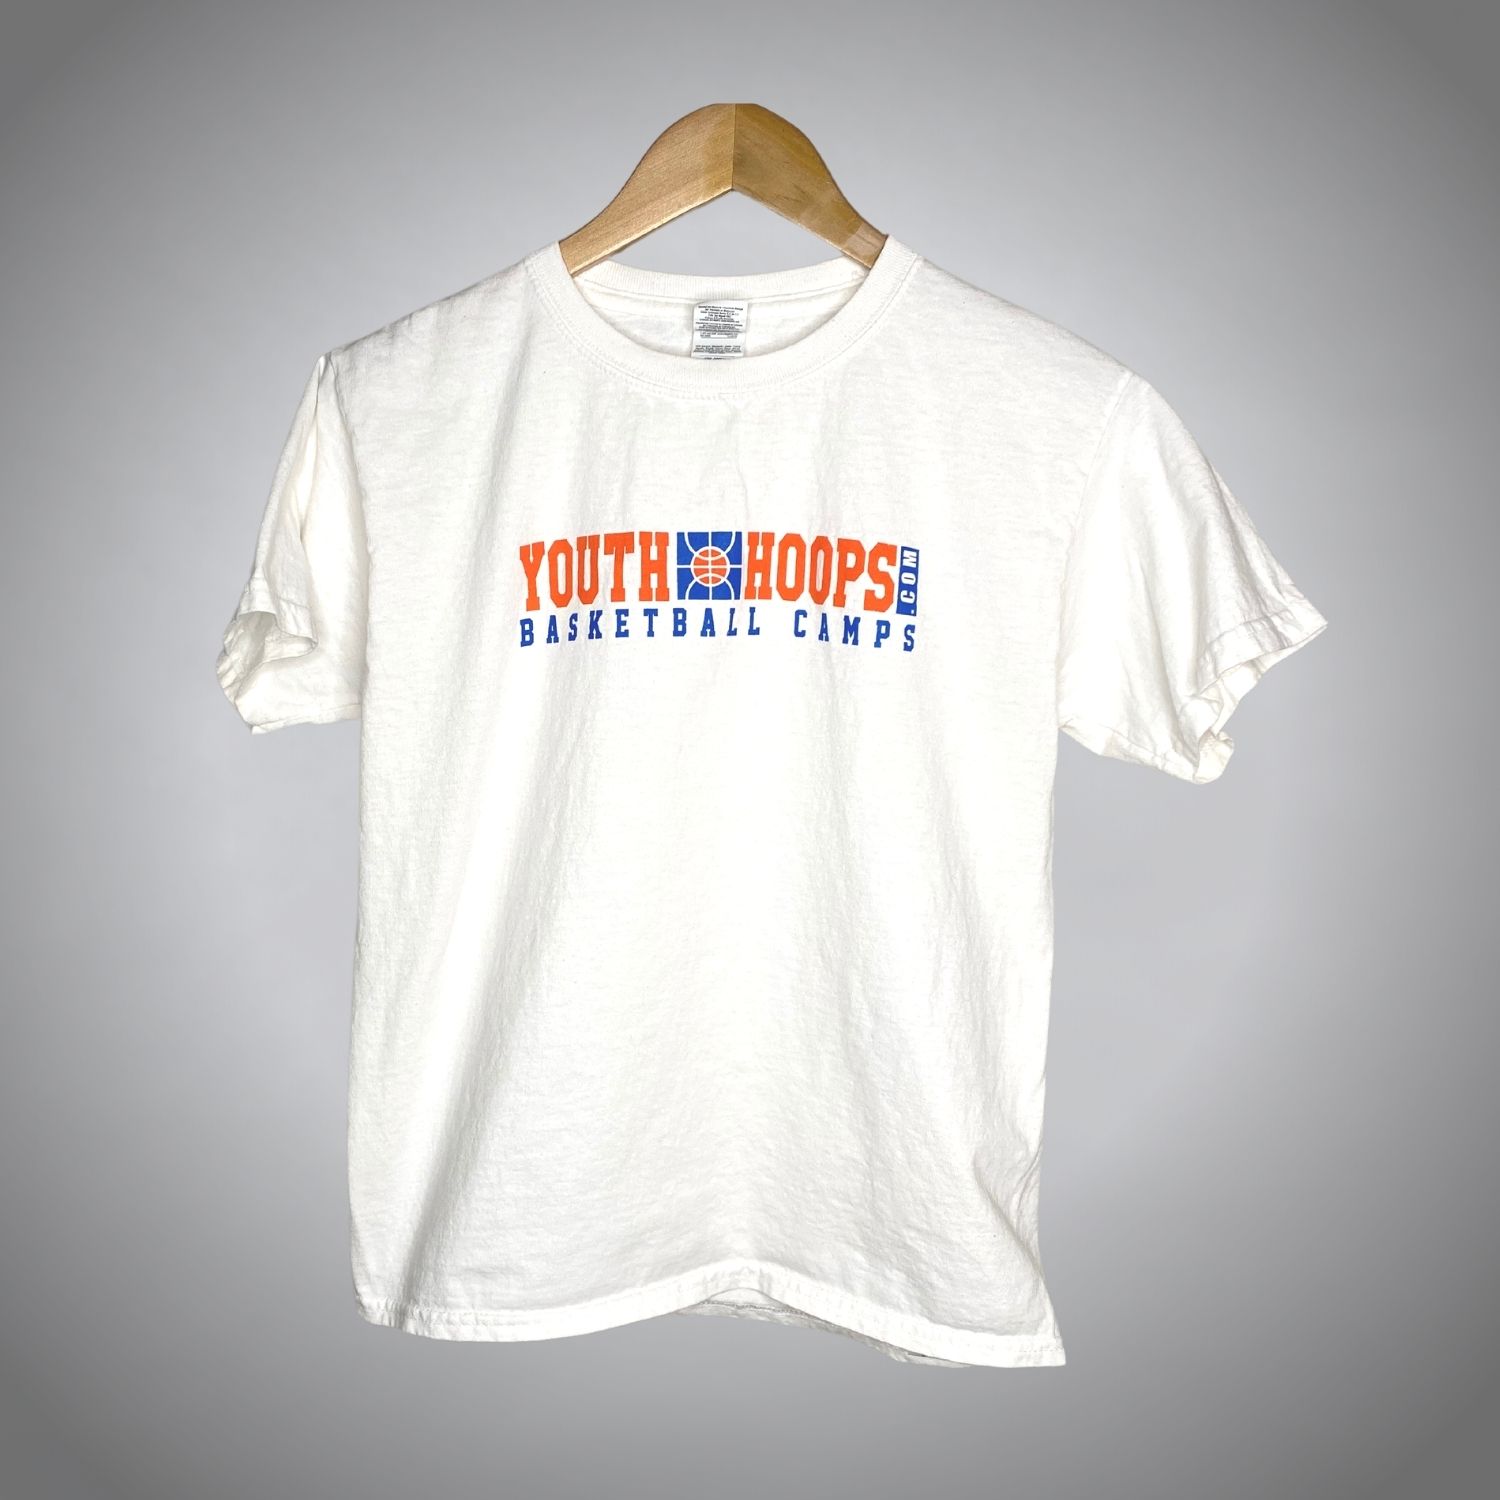 White Youth Hoops Tee Shirt - Youth Hoops Basketball Camps